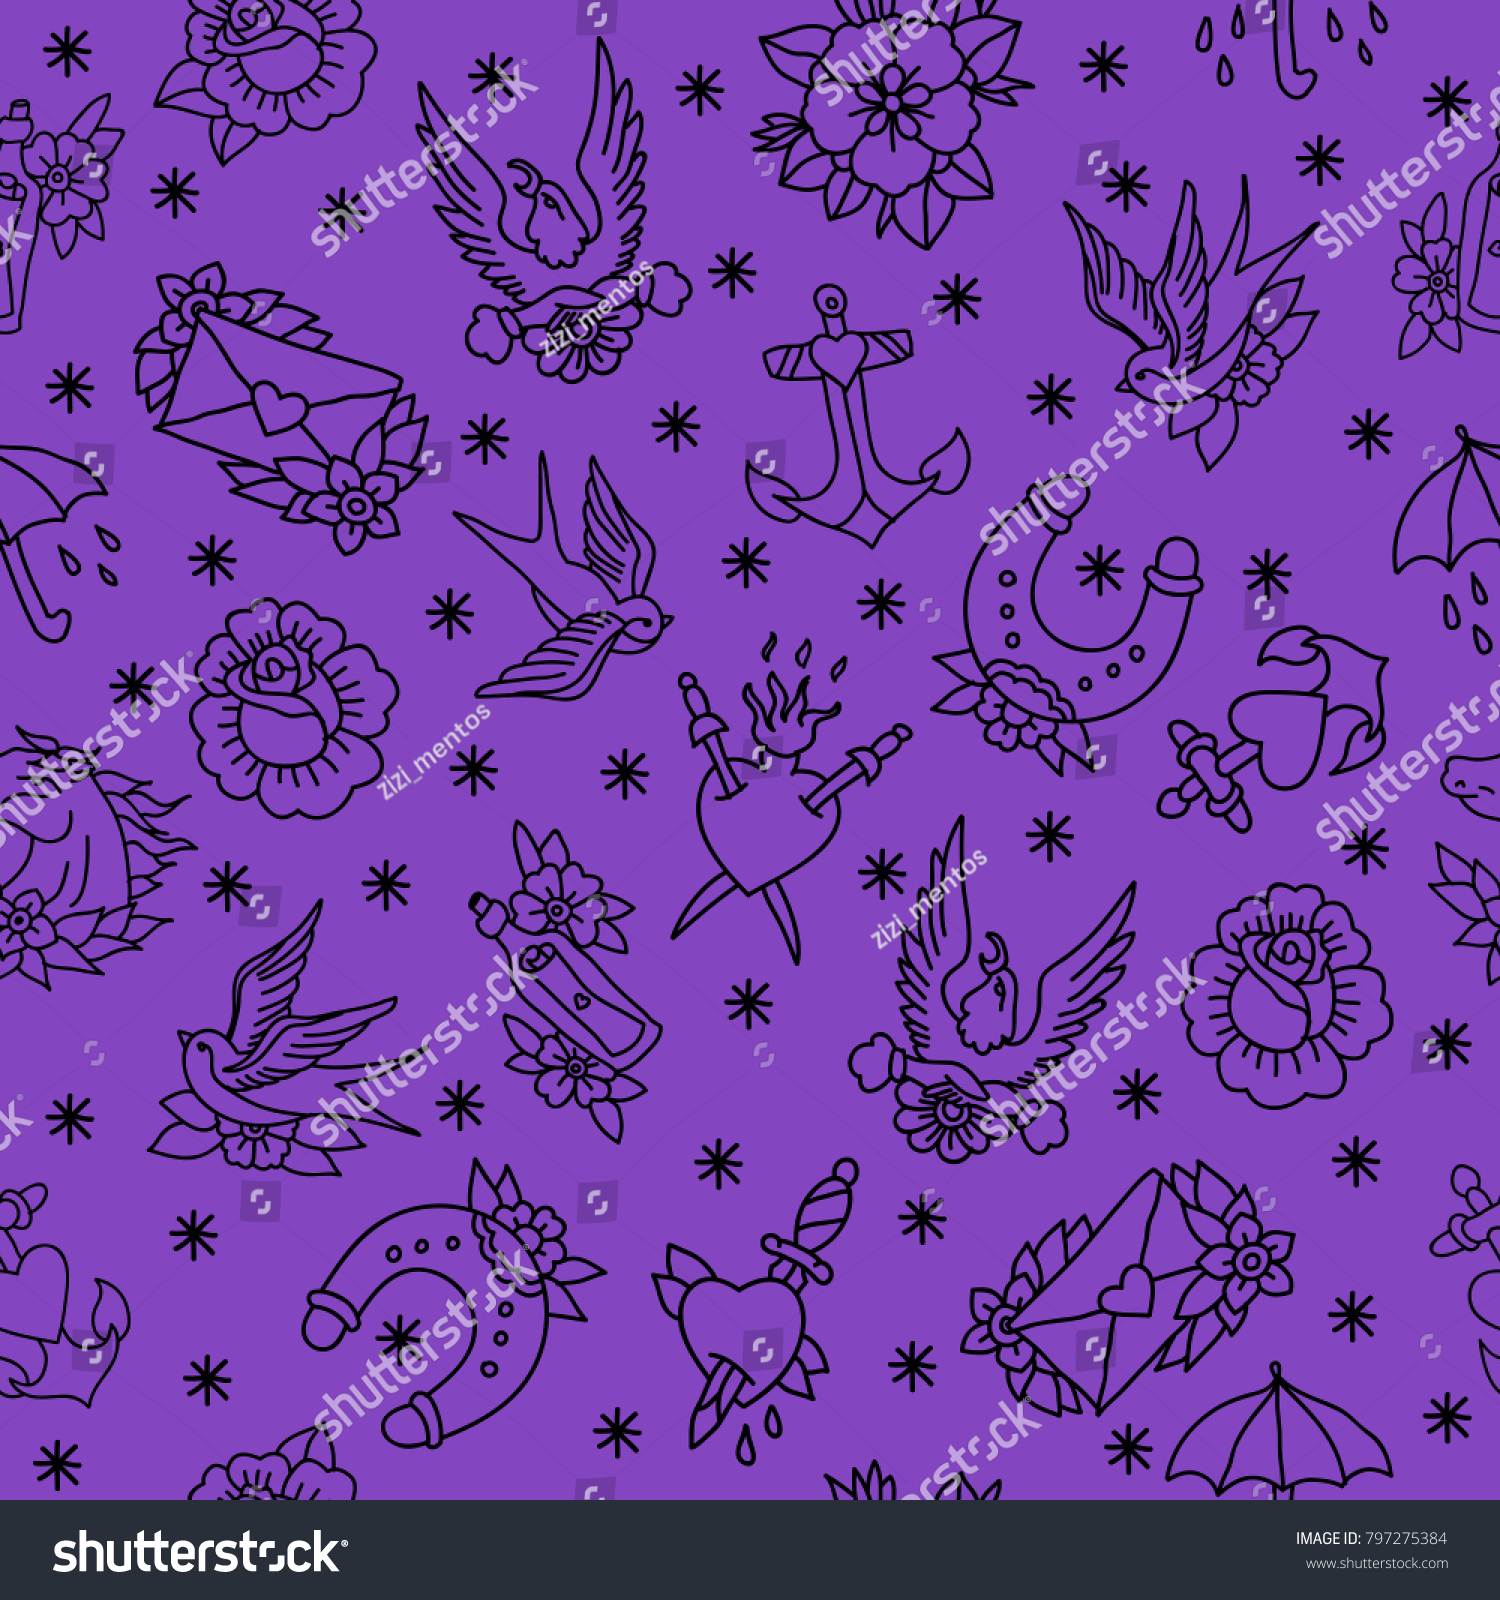 Traditional Tattoo Flash Seamless Doodle Pattern Stock Vector Royalty Free 797275384 6553